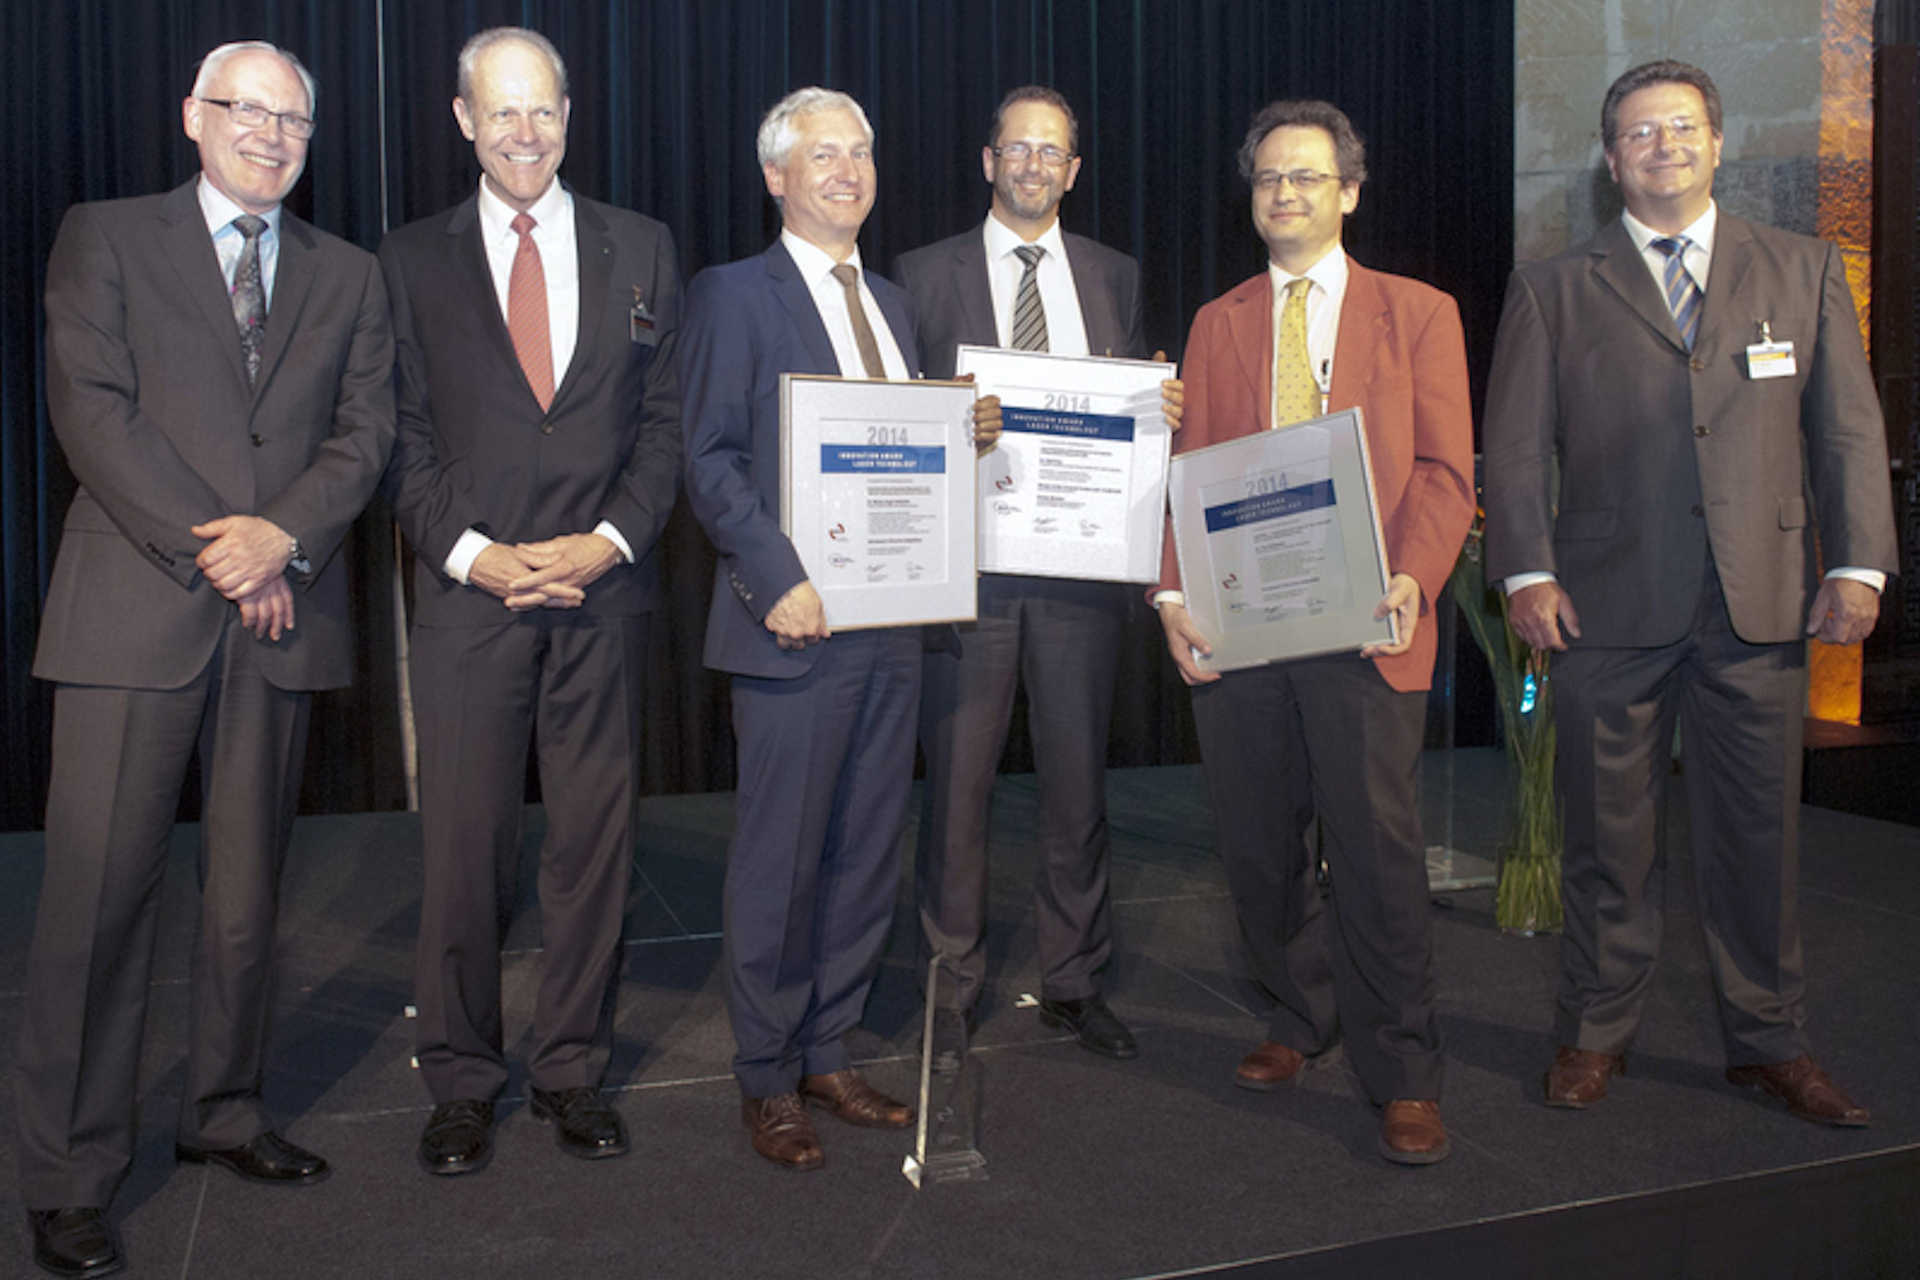 Laser Material Processing wins second place